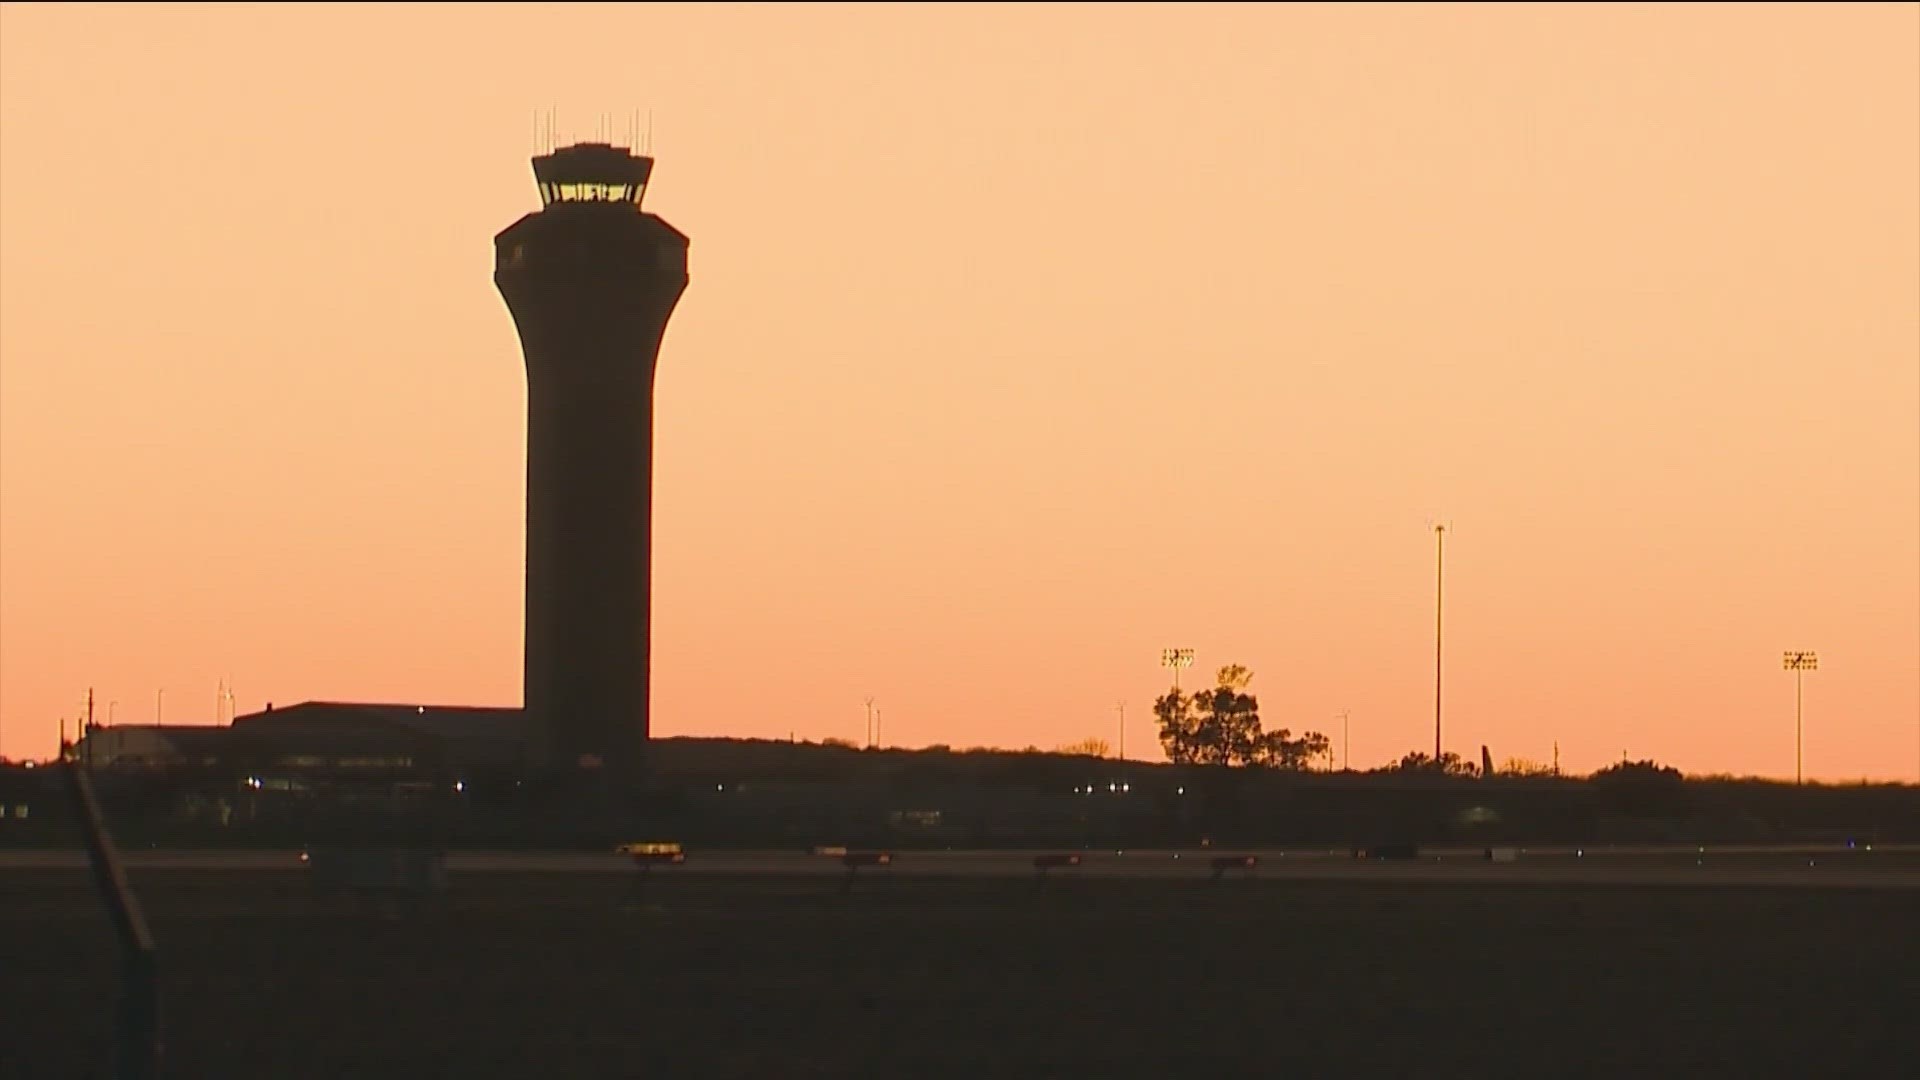 Rep. Lloyd Doggett is putting pressure on the FAA to address staffing and safety at Austin's airport. It comes after multiple near collisions in the past year.